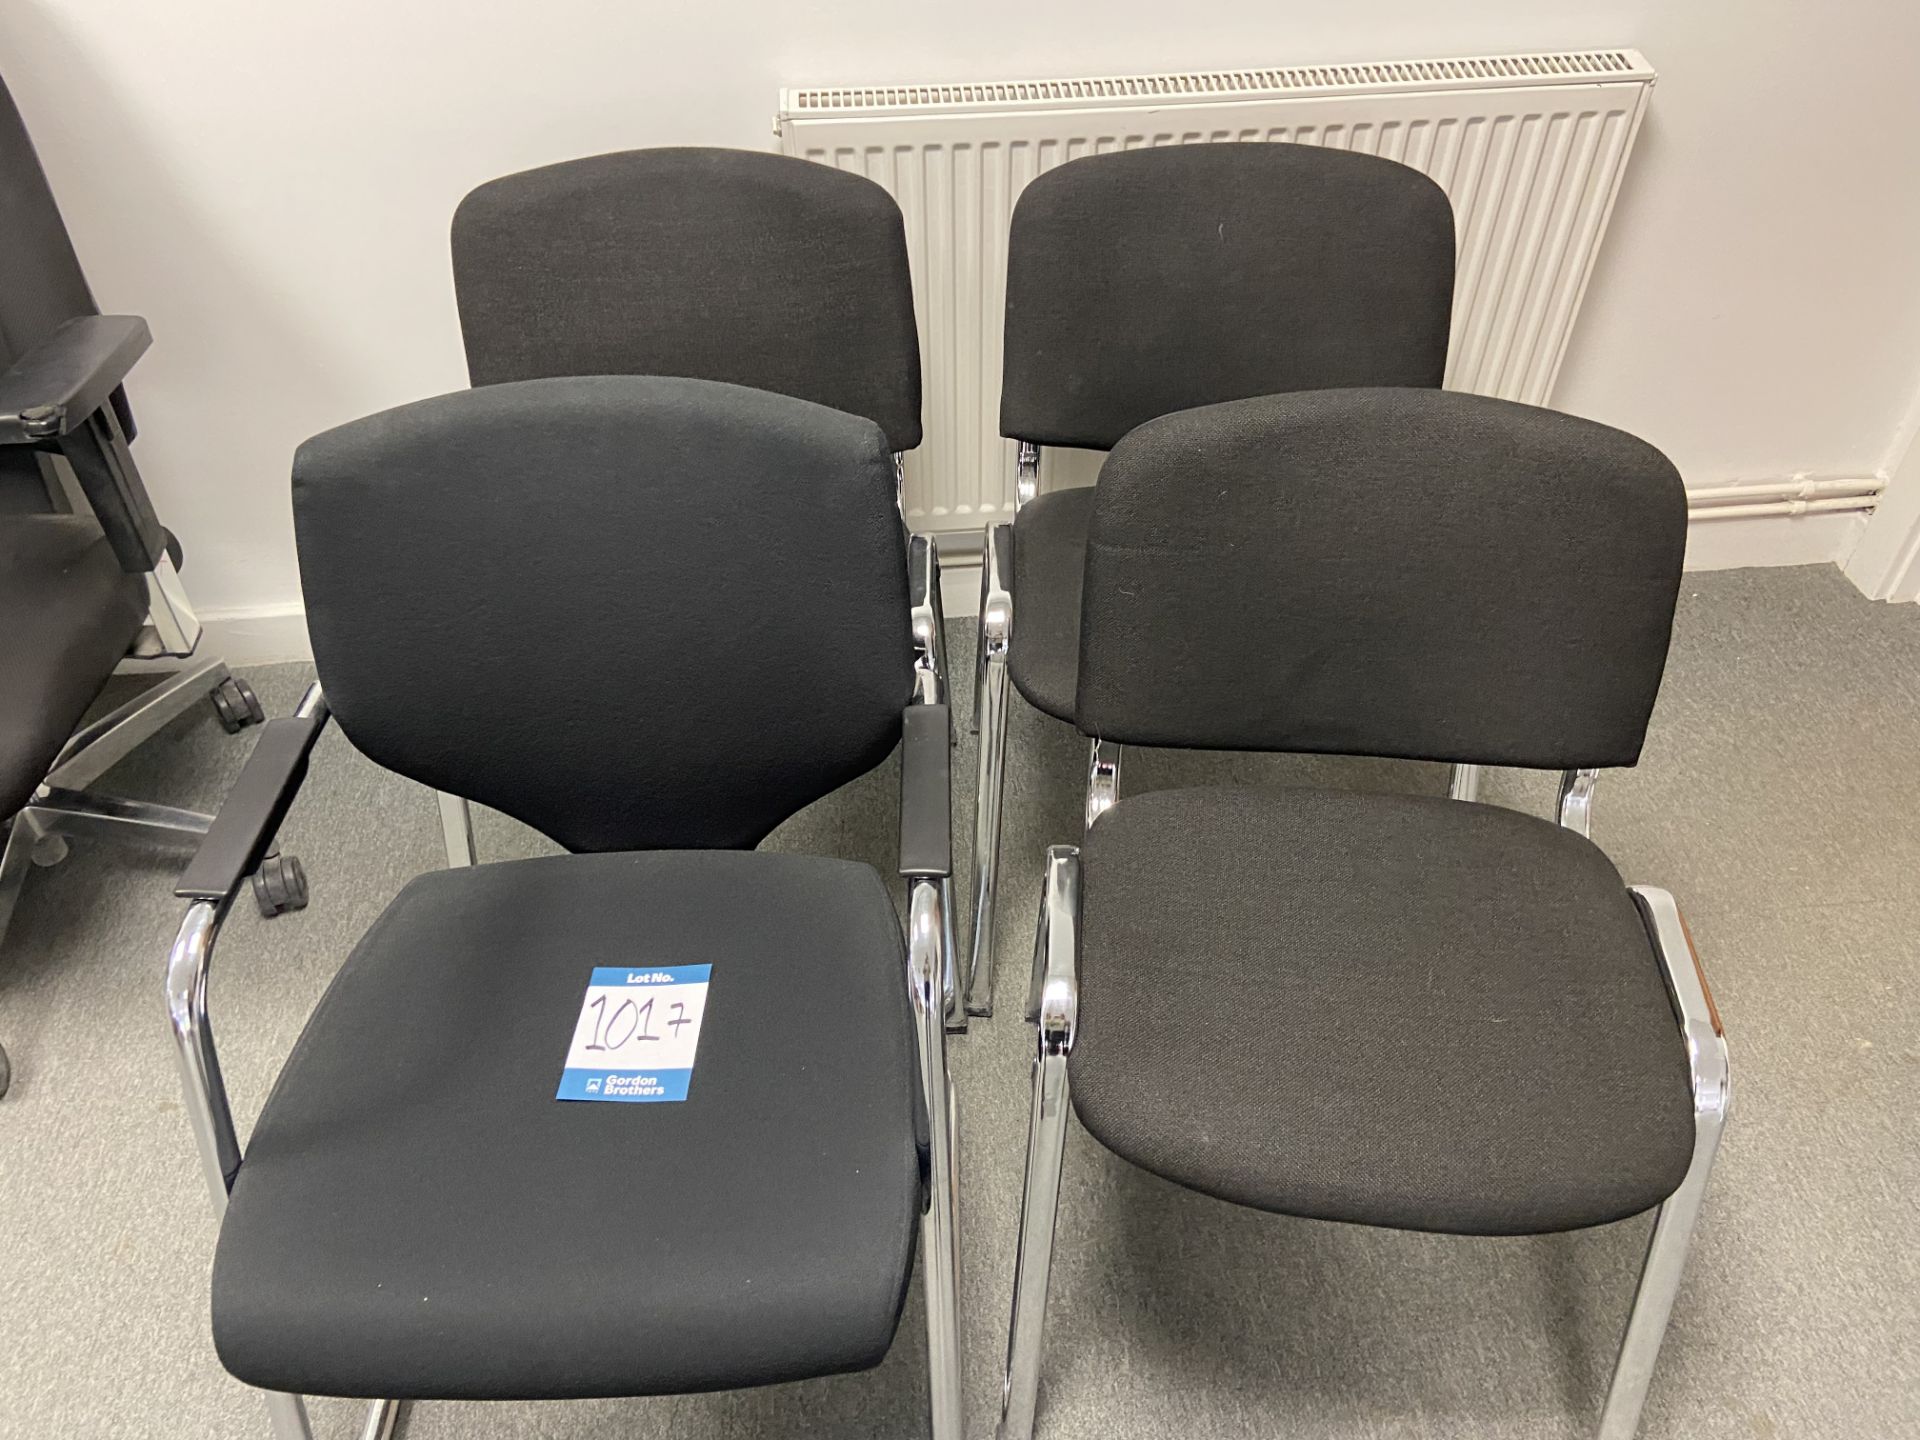 Lot comprisng: four meeting room chairs